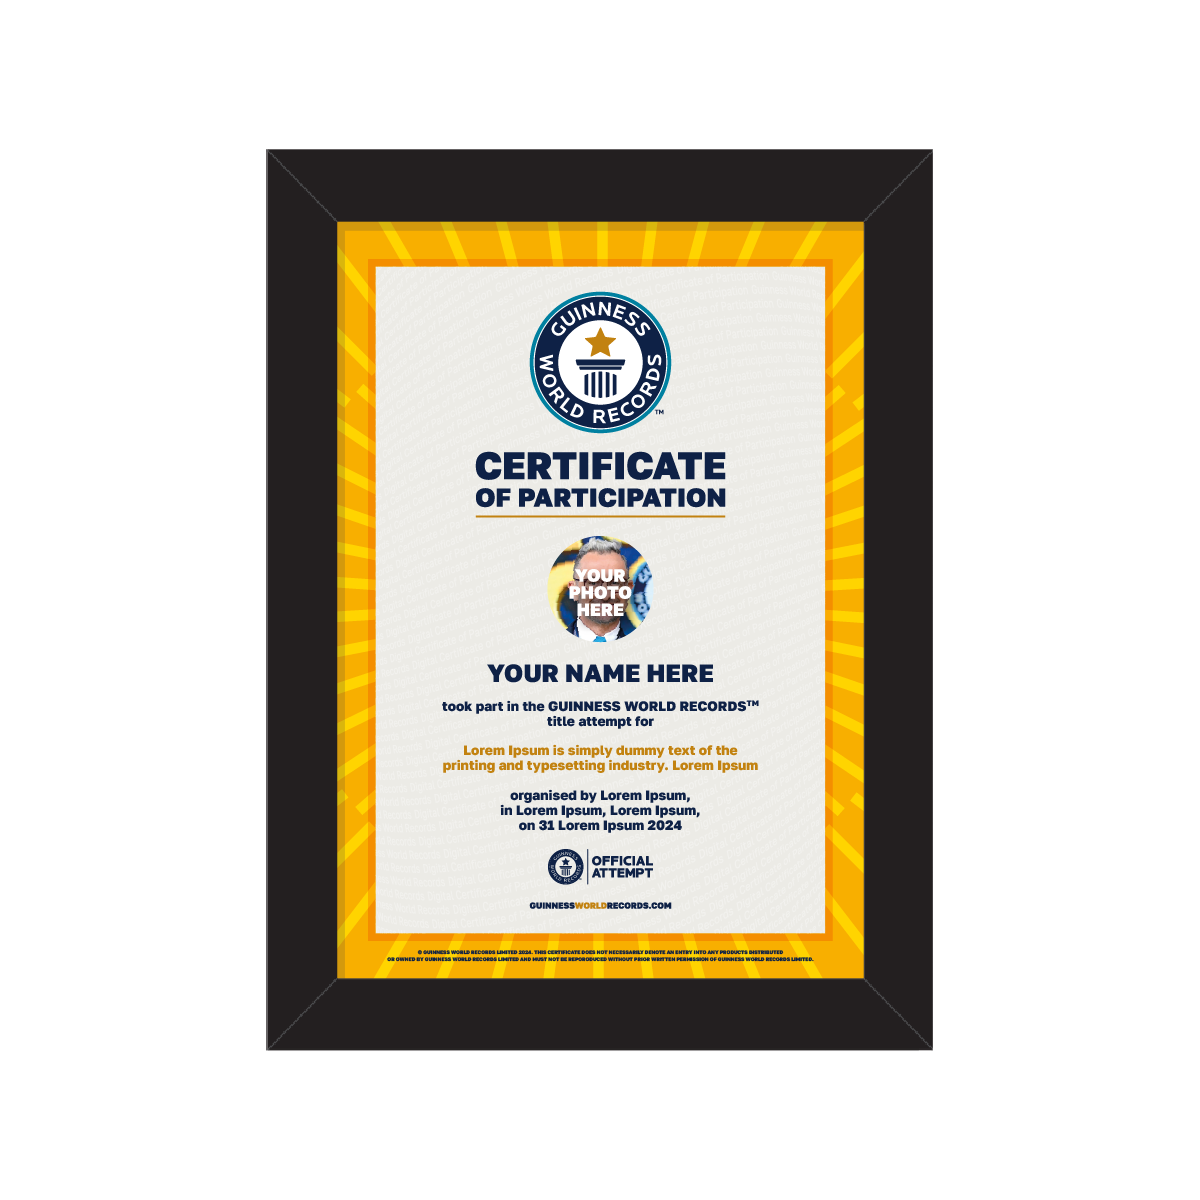 Guinness World Records Certificate of Participation